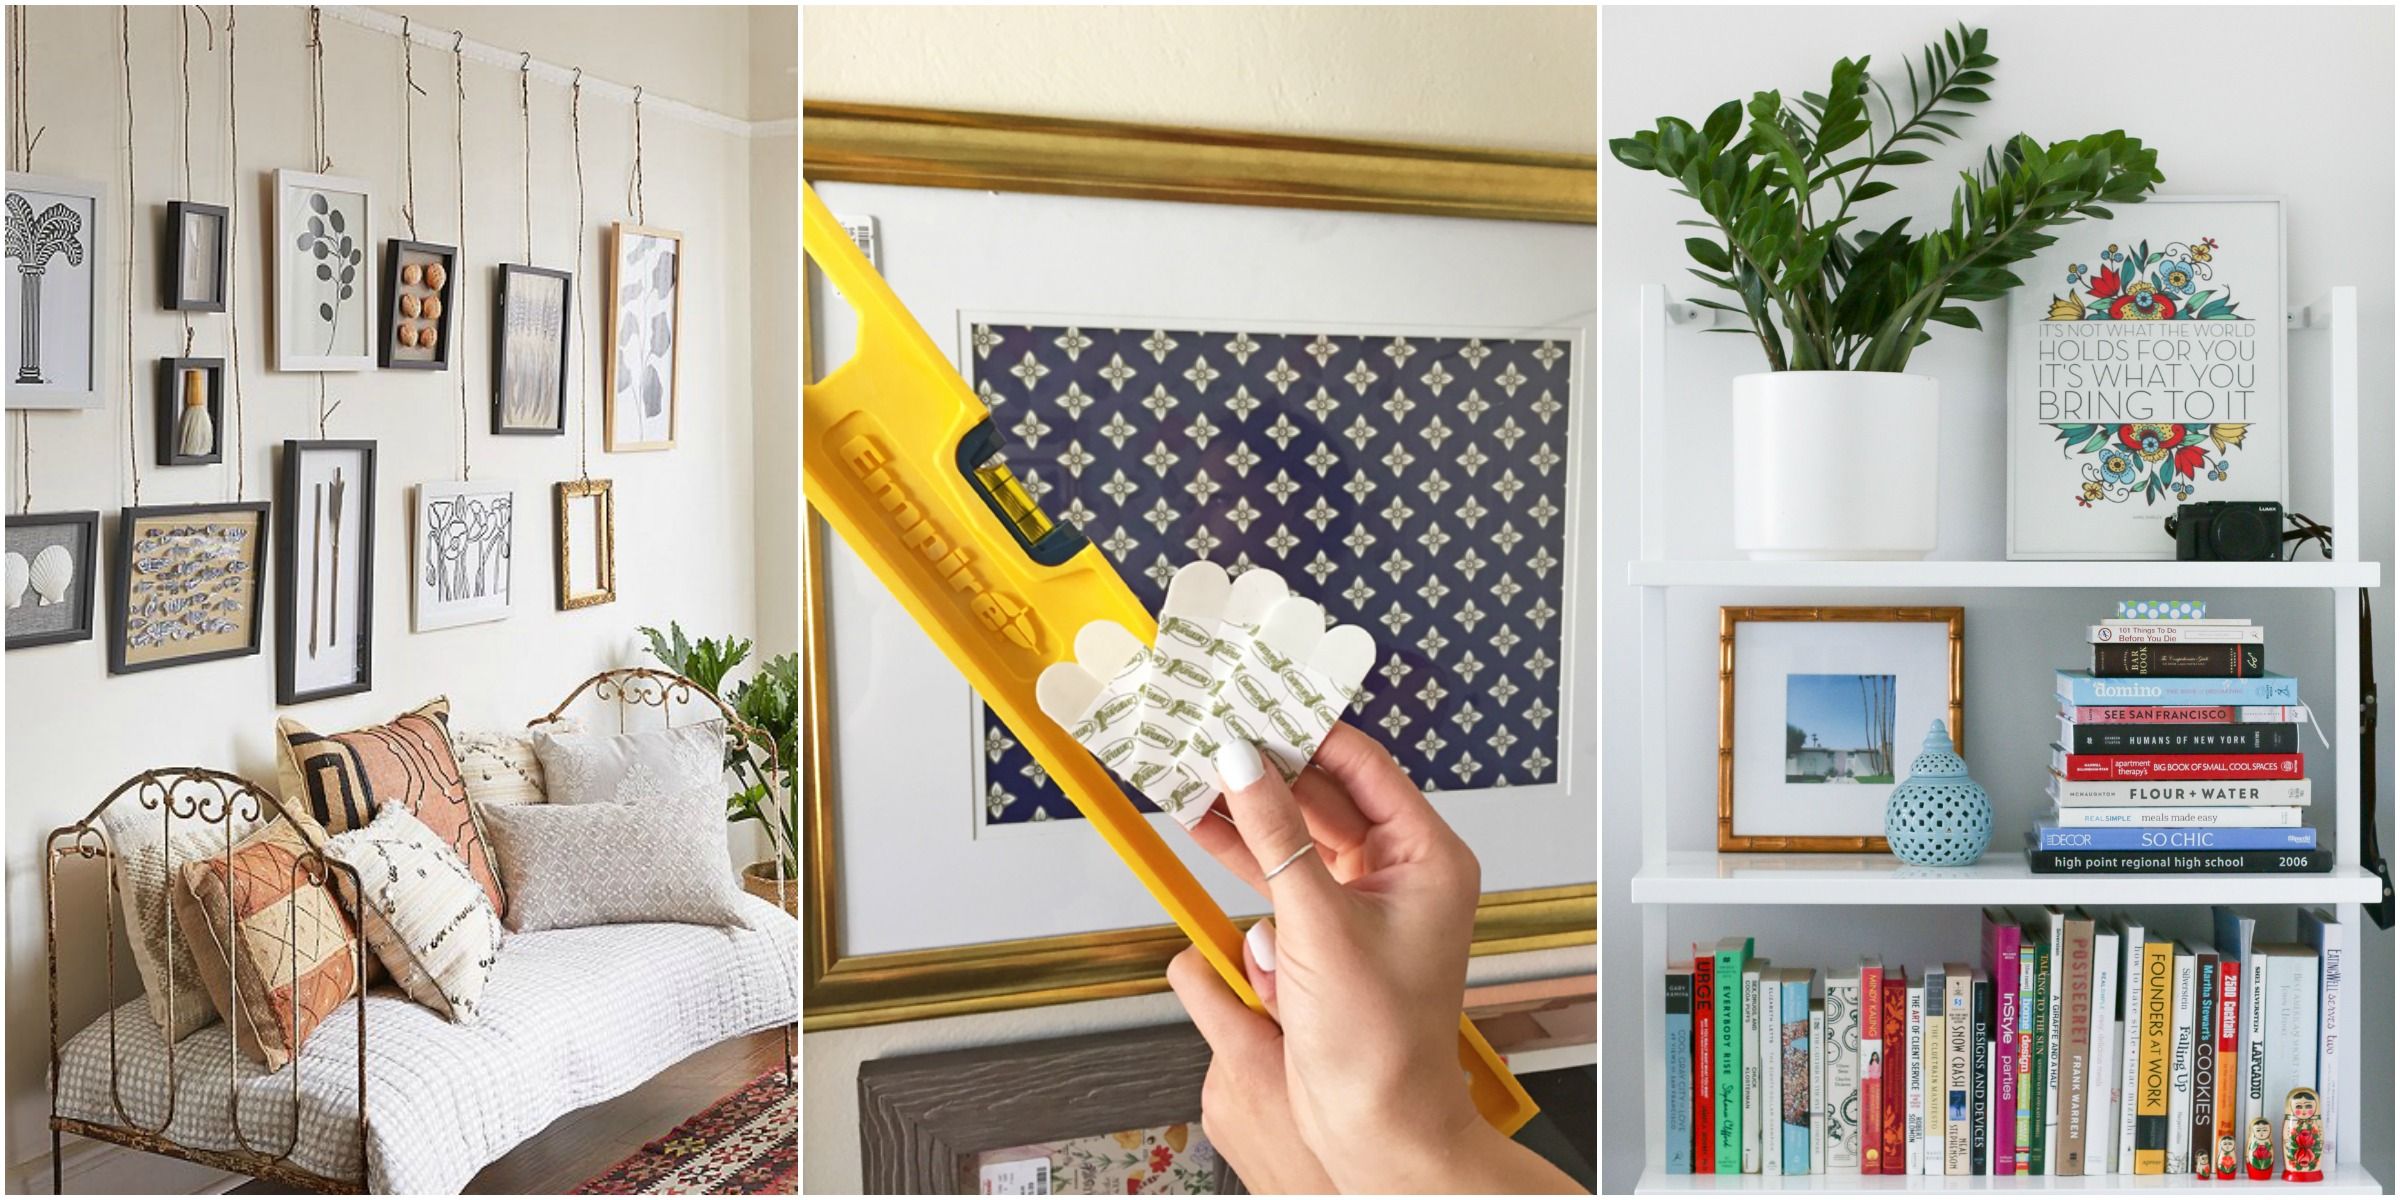 Hang Art Without Nails How To, How To Hang Up Wall Decor Without Nails